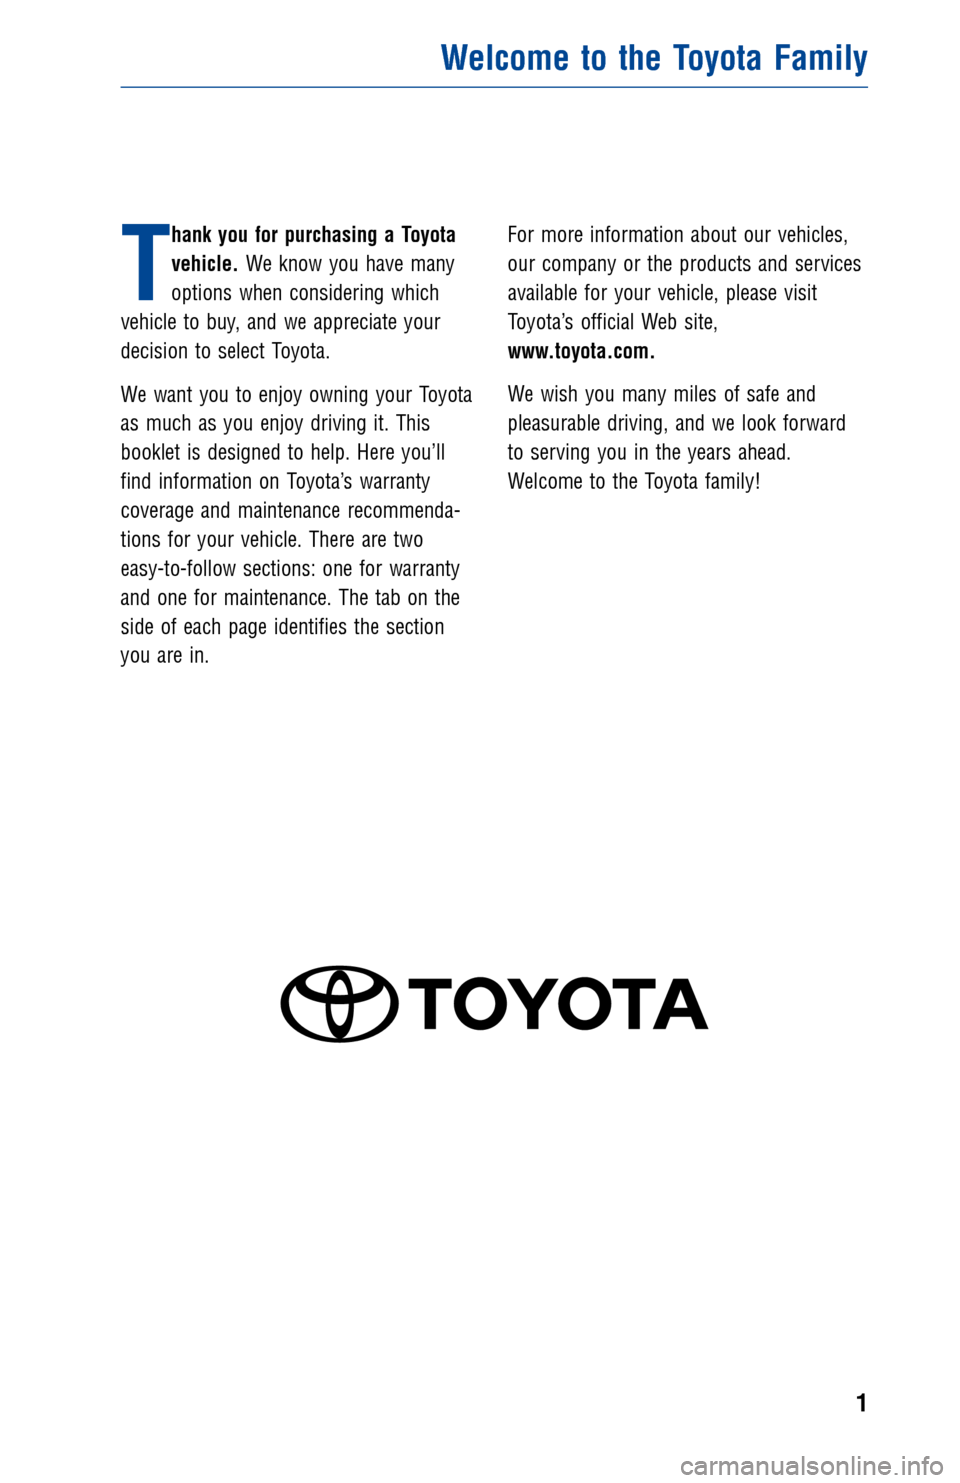 TOYOTA 4RUNNER 2013 N280 / 5.G Warranty And Maintenance Guide JOBNAME: 1139982-2013-4rnWG-E PAGE: 1 SESS: 11 OUTPUT: Tue Jul 31 13:18:09 2012
/tweddle/toyota/sched-maint/1139982-en-4rn/wg
T
hank you for purchasing a Toyota
vehicle.We know you have many
options w